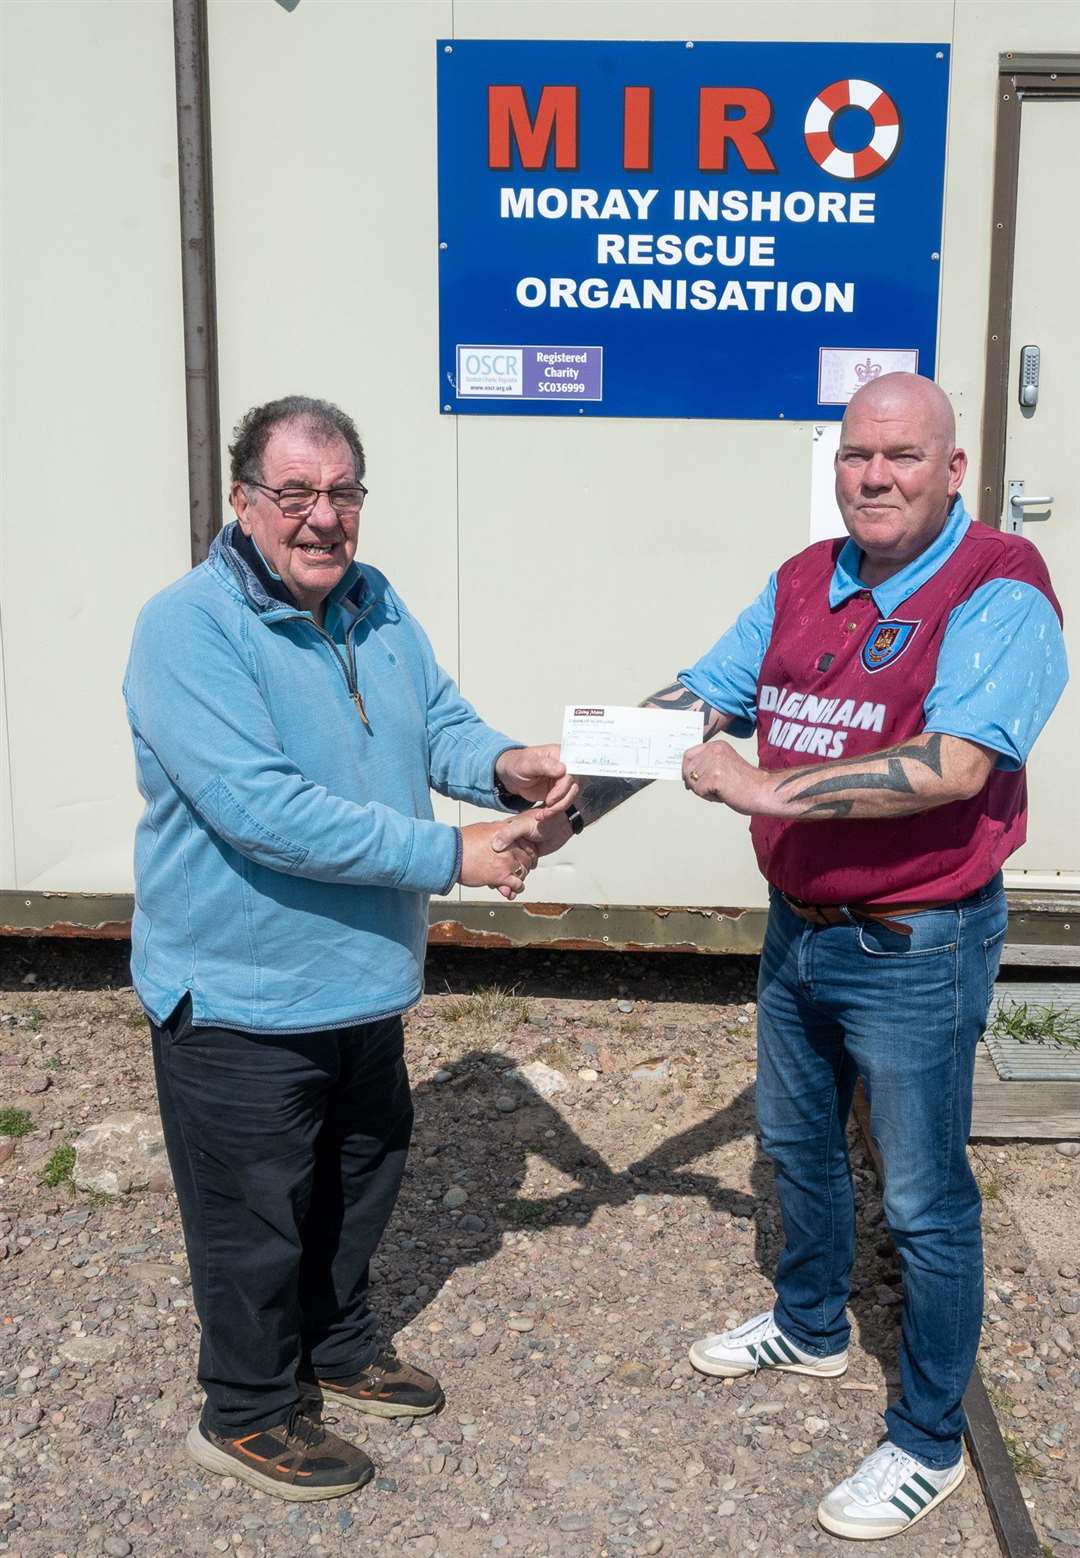 James Murdoch (right), representing the Robertson Trust and Edrington, handing over the cheque to MIRO Chairman, John Low. Photo by Morven Mackenzie